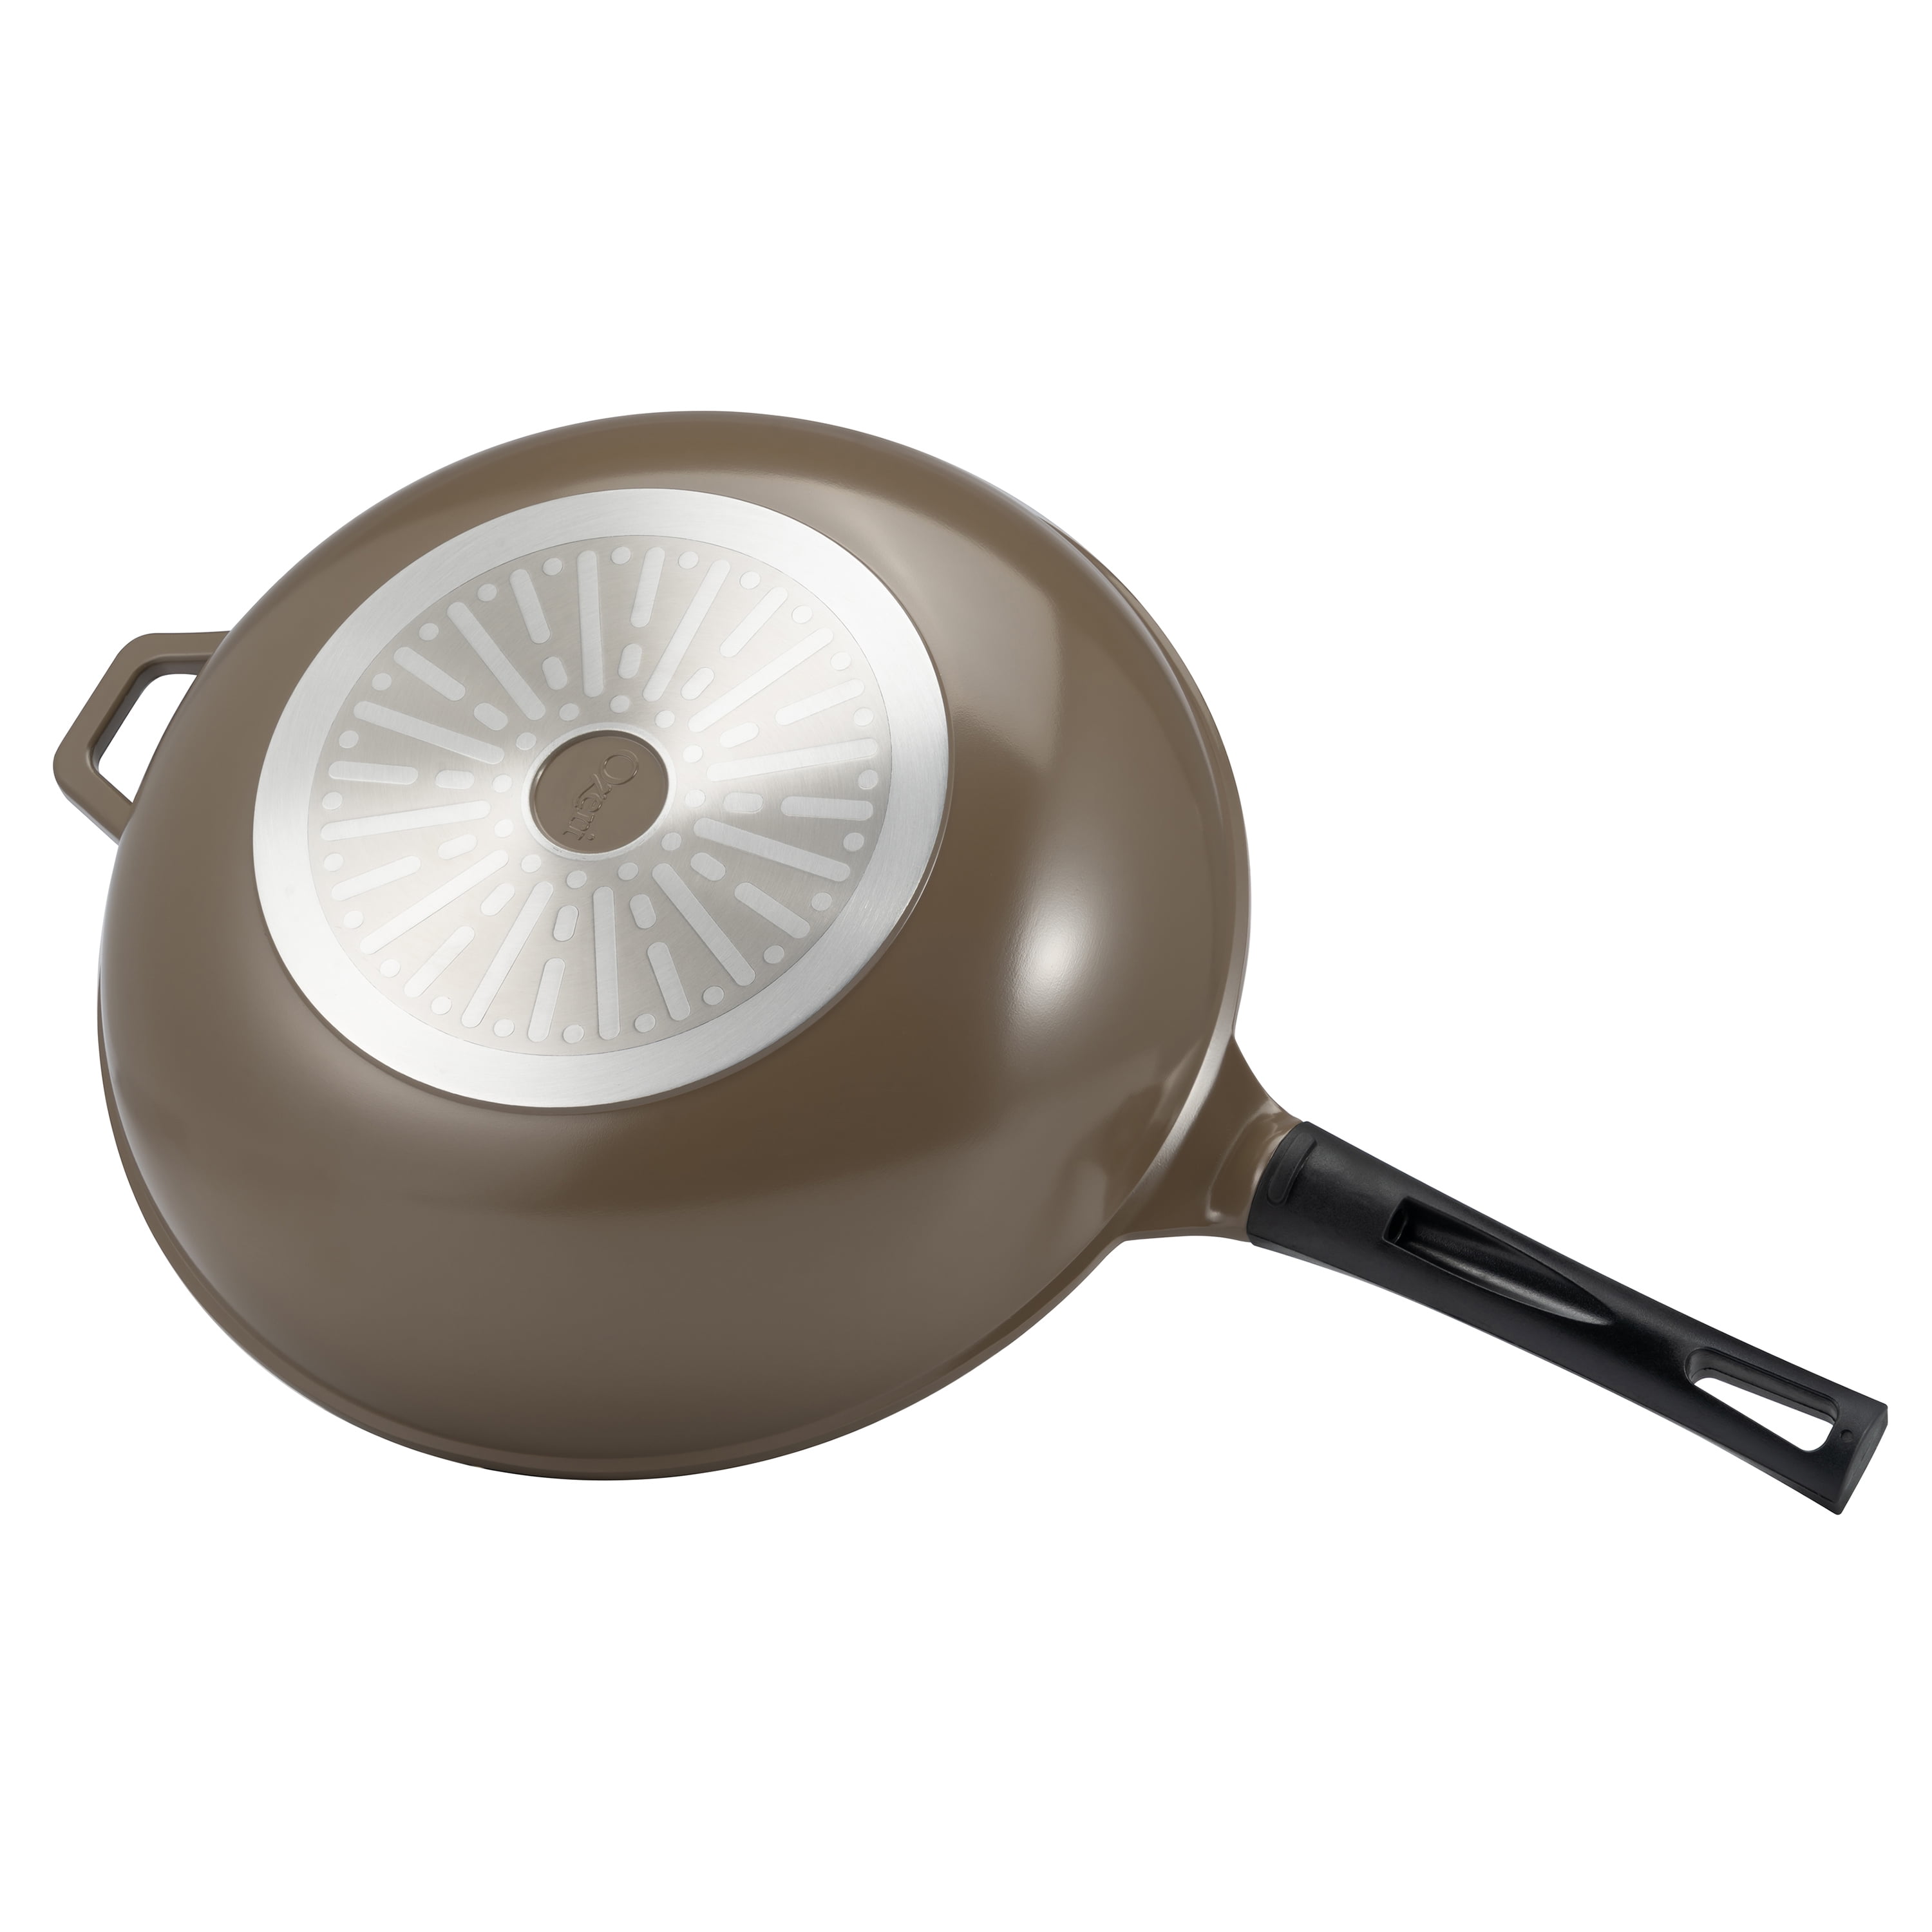 14 Green Earth Wok by Ozeri, with Smooth Ceramic Non-Stick Coating (100%  PTFE and PFOA Free), 1 - Harris Teeter